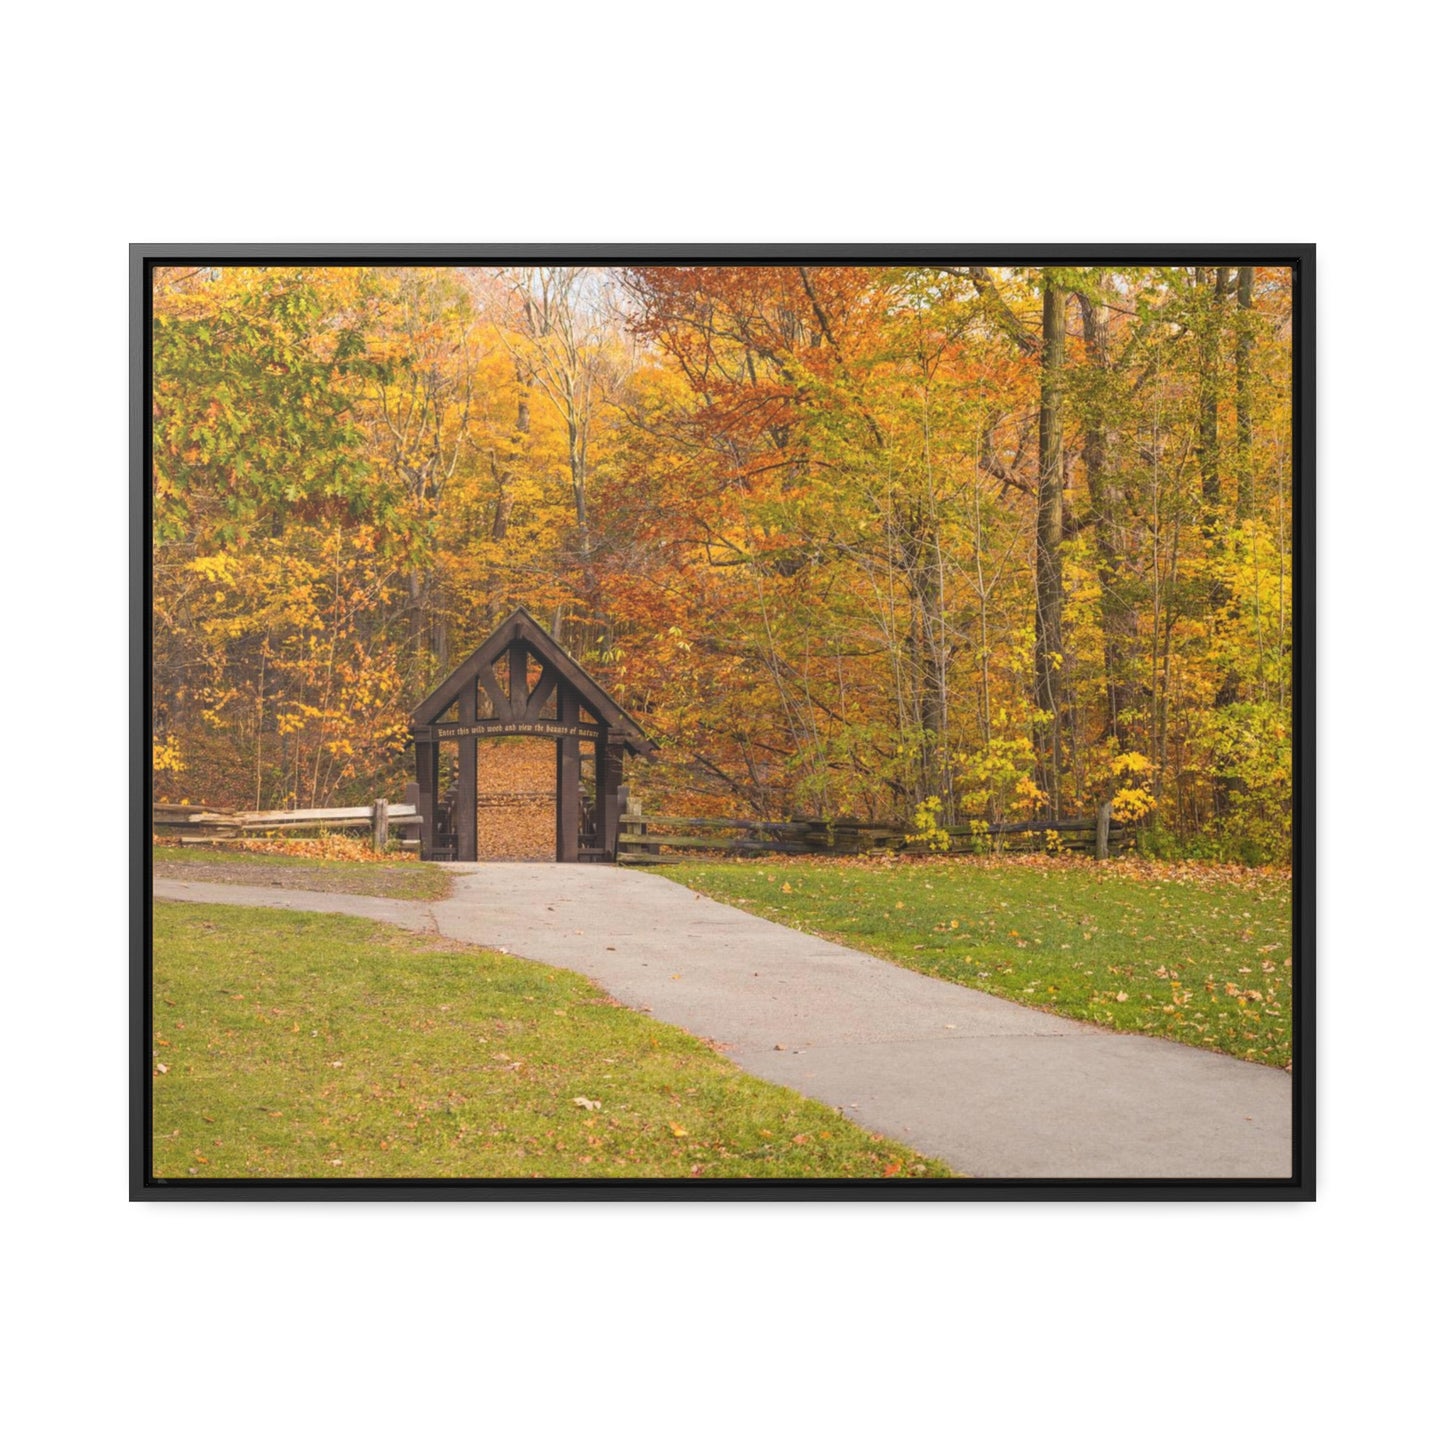 Seven Bridges Trail’s Covered Bridge at Grant Park in South Milwaukee Wisconsin, Photography Horizontal Framed Canvas Wrap Wall Art